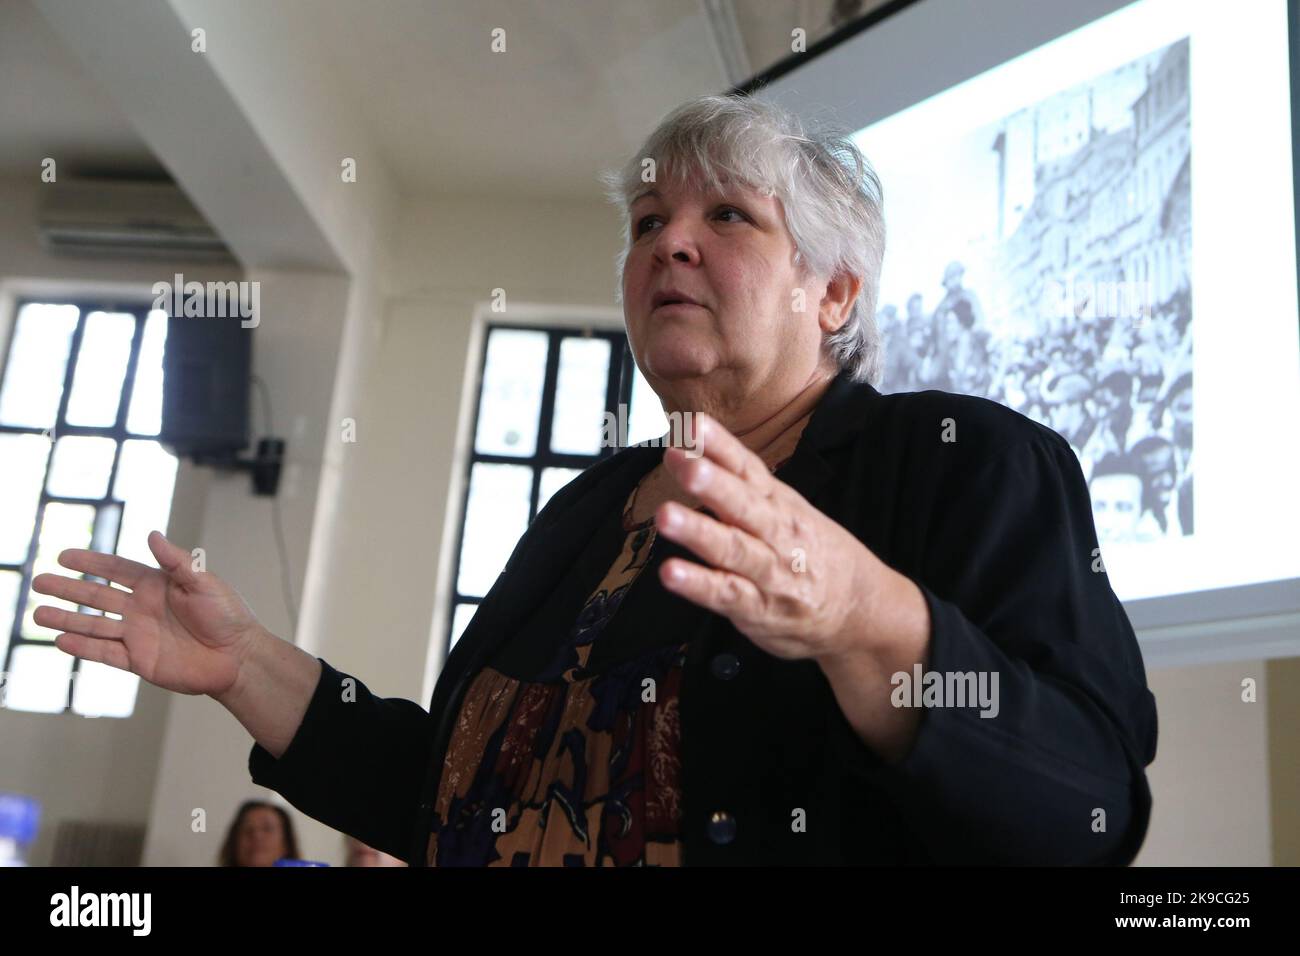 Aleida Guevara March, eldest daughter of legendary Argentinian guerrilla leader Ernesto Che Guevara, speaks at a function for 55 th anniversary of his death in high school in Athens. Stock Photo